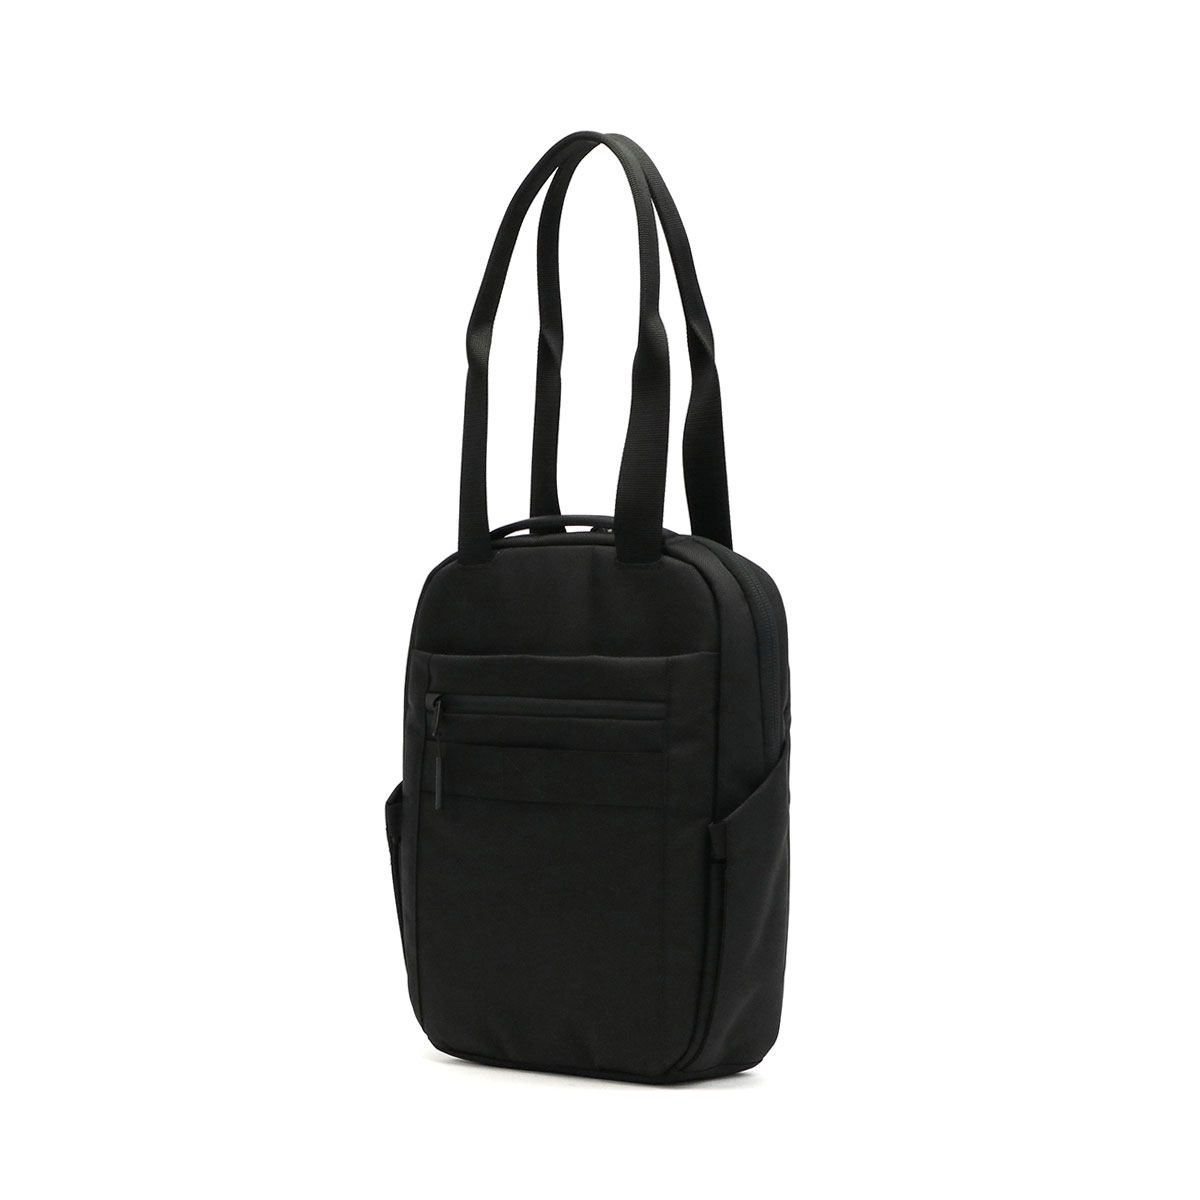 Aer エアー Work Collection Tech Tote トートバッグ 12.5L 31013